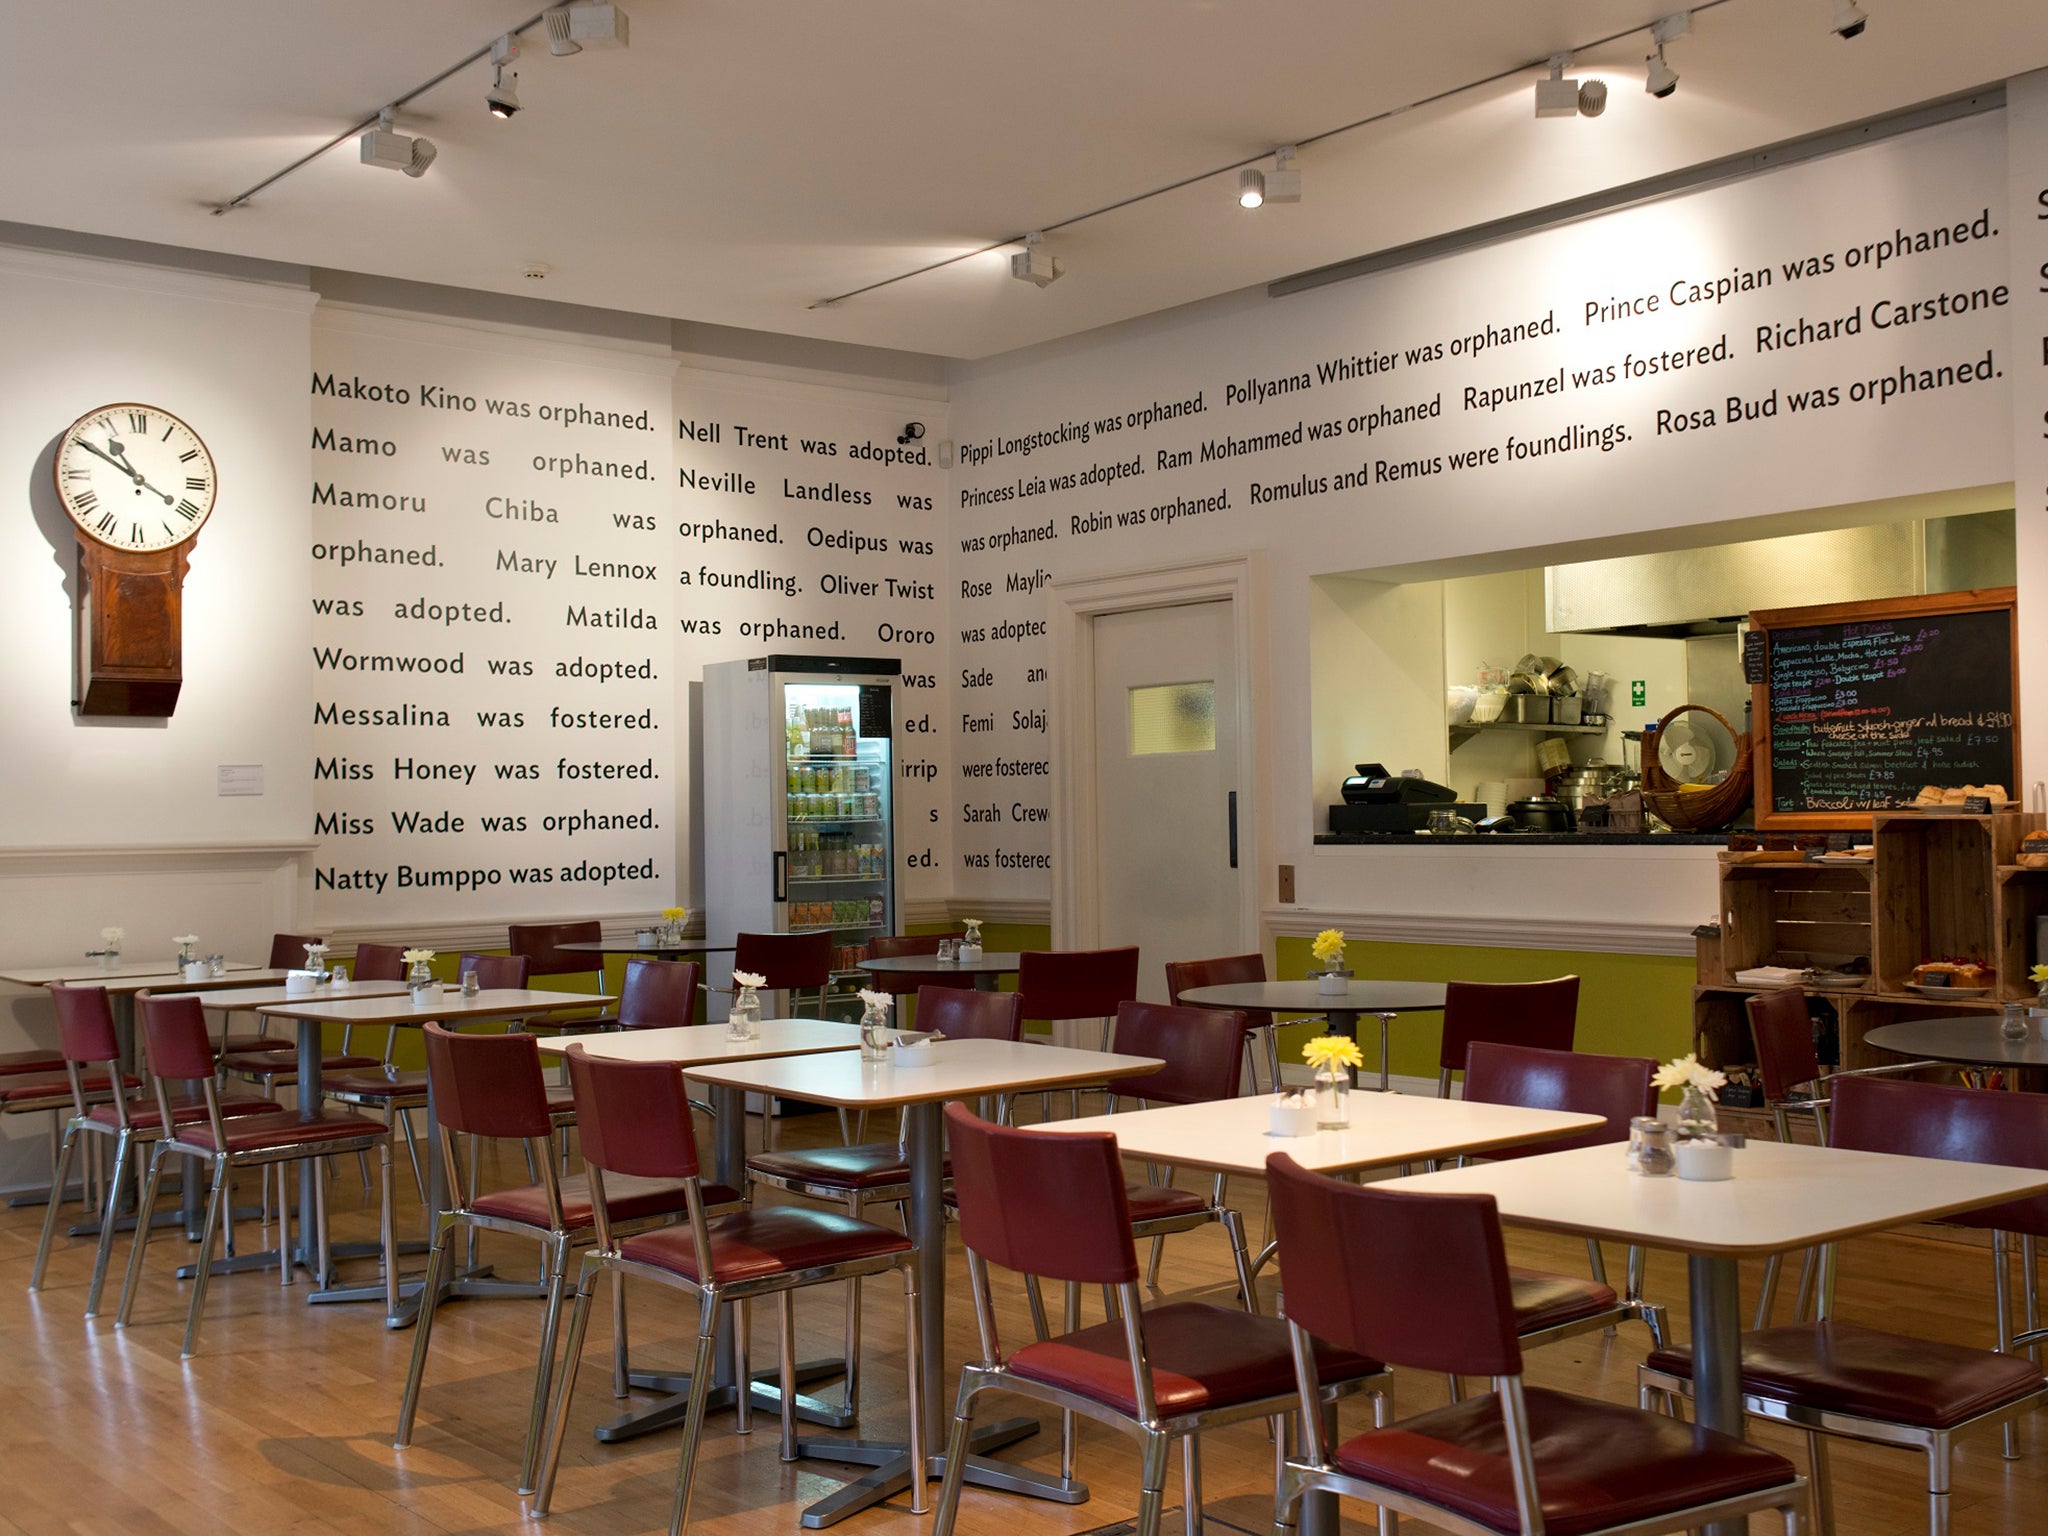 Lemn Sissay’s poem, 'Superman was a Foundling', on the walls of the museum café